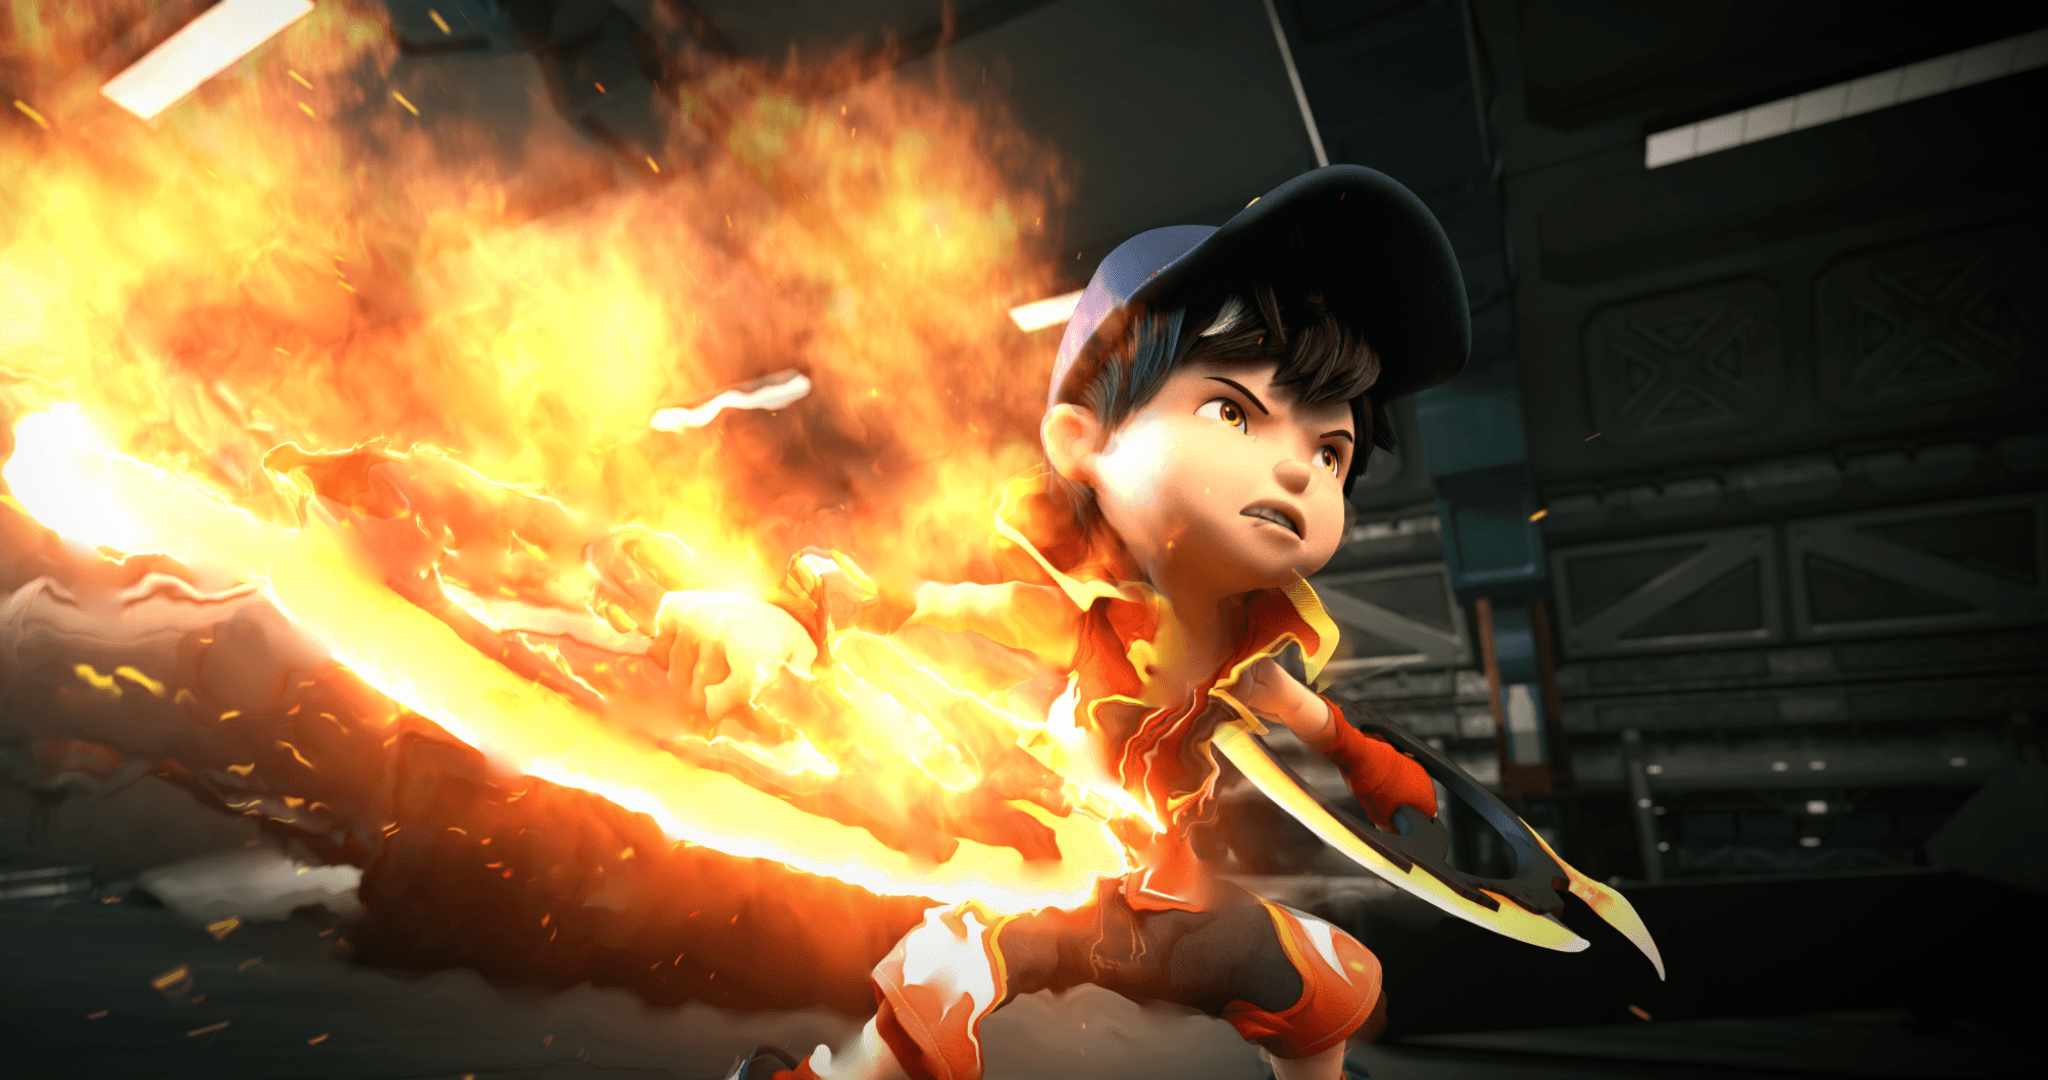 BoBoiBoy Movie 2 To Be Released In 5 Countries With Much Sensation